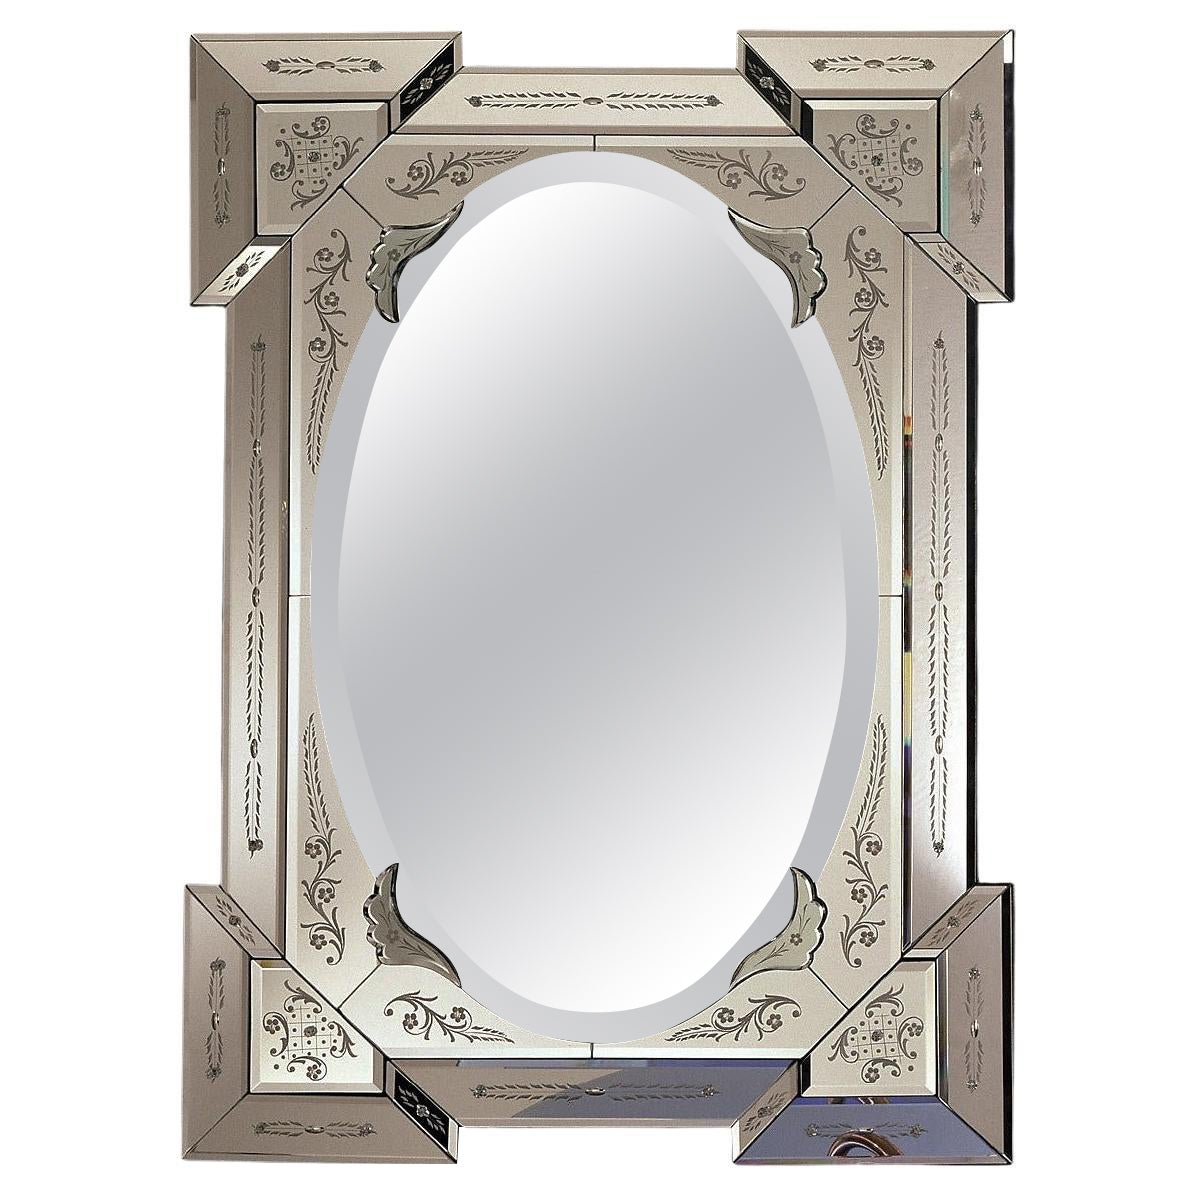 "Balanzone"  Murano Glass Mirror, 800 French Style by Fratelli Tosi